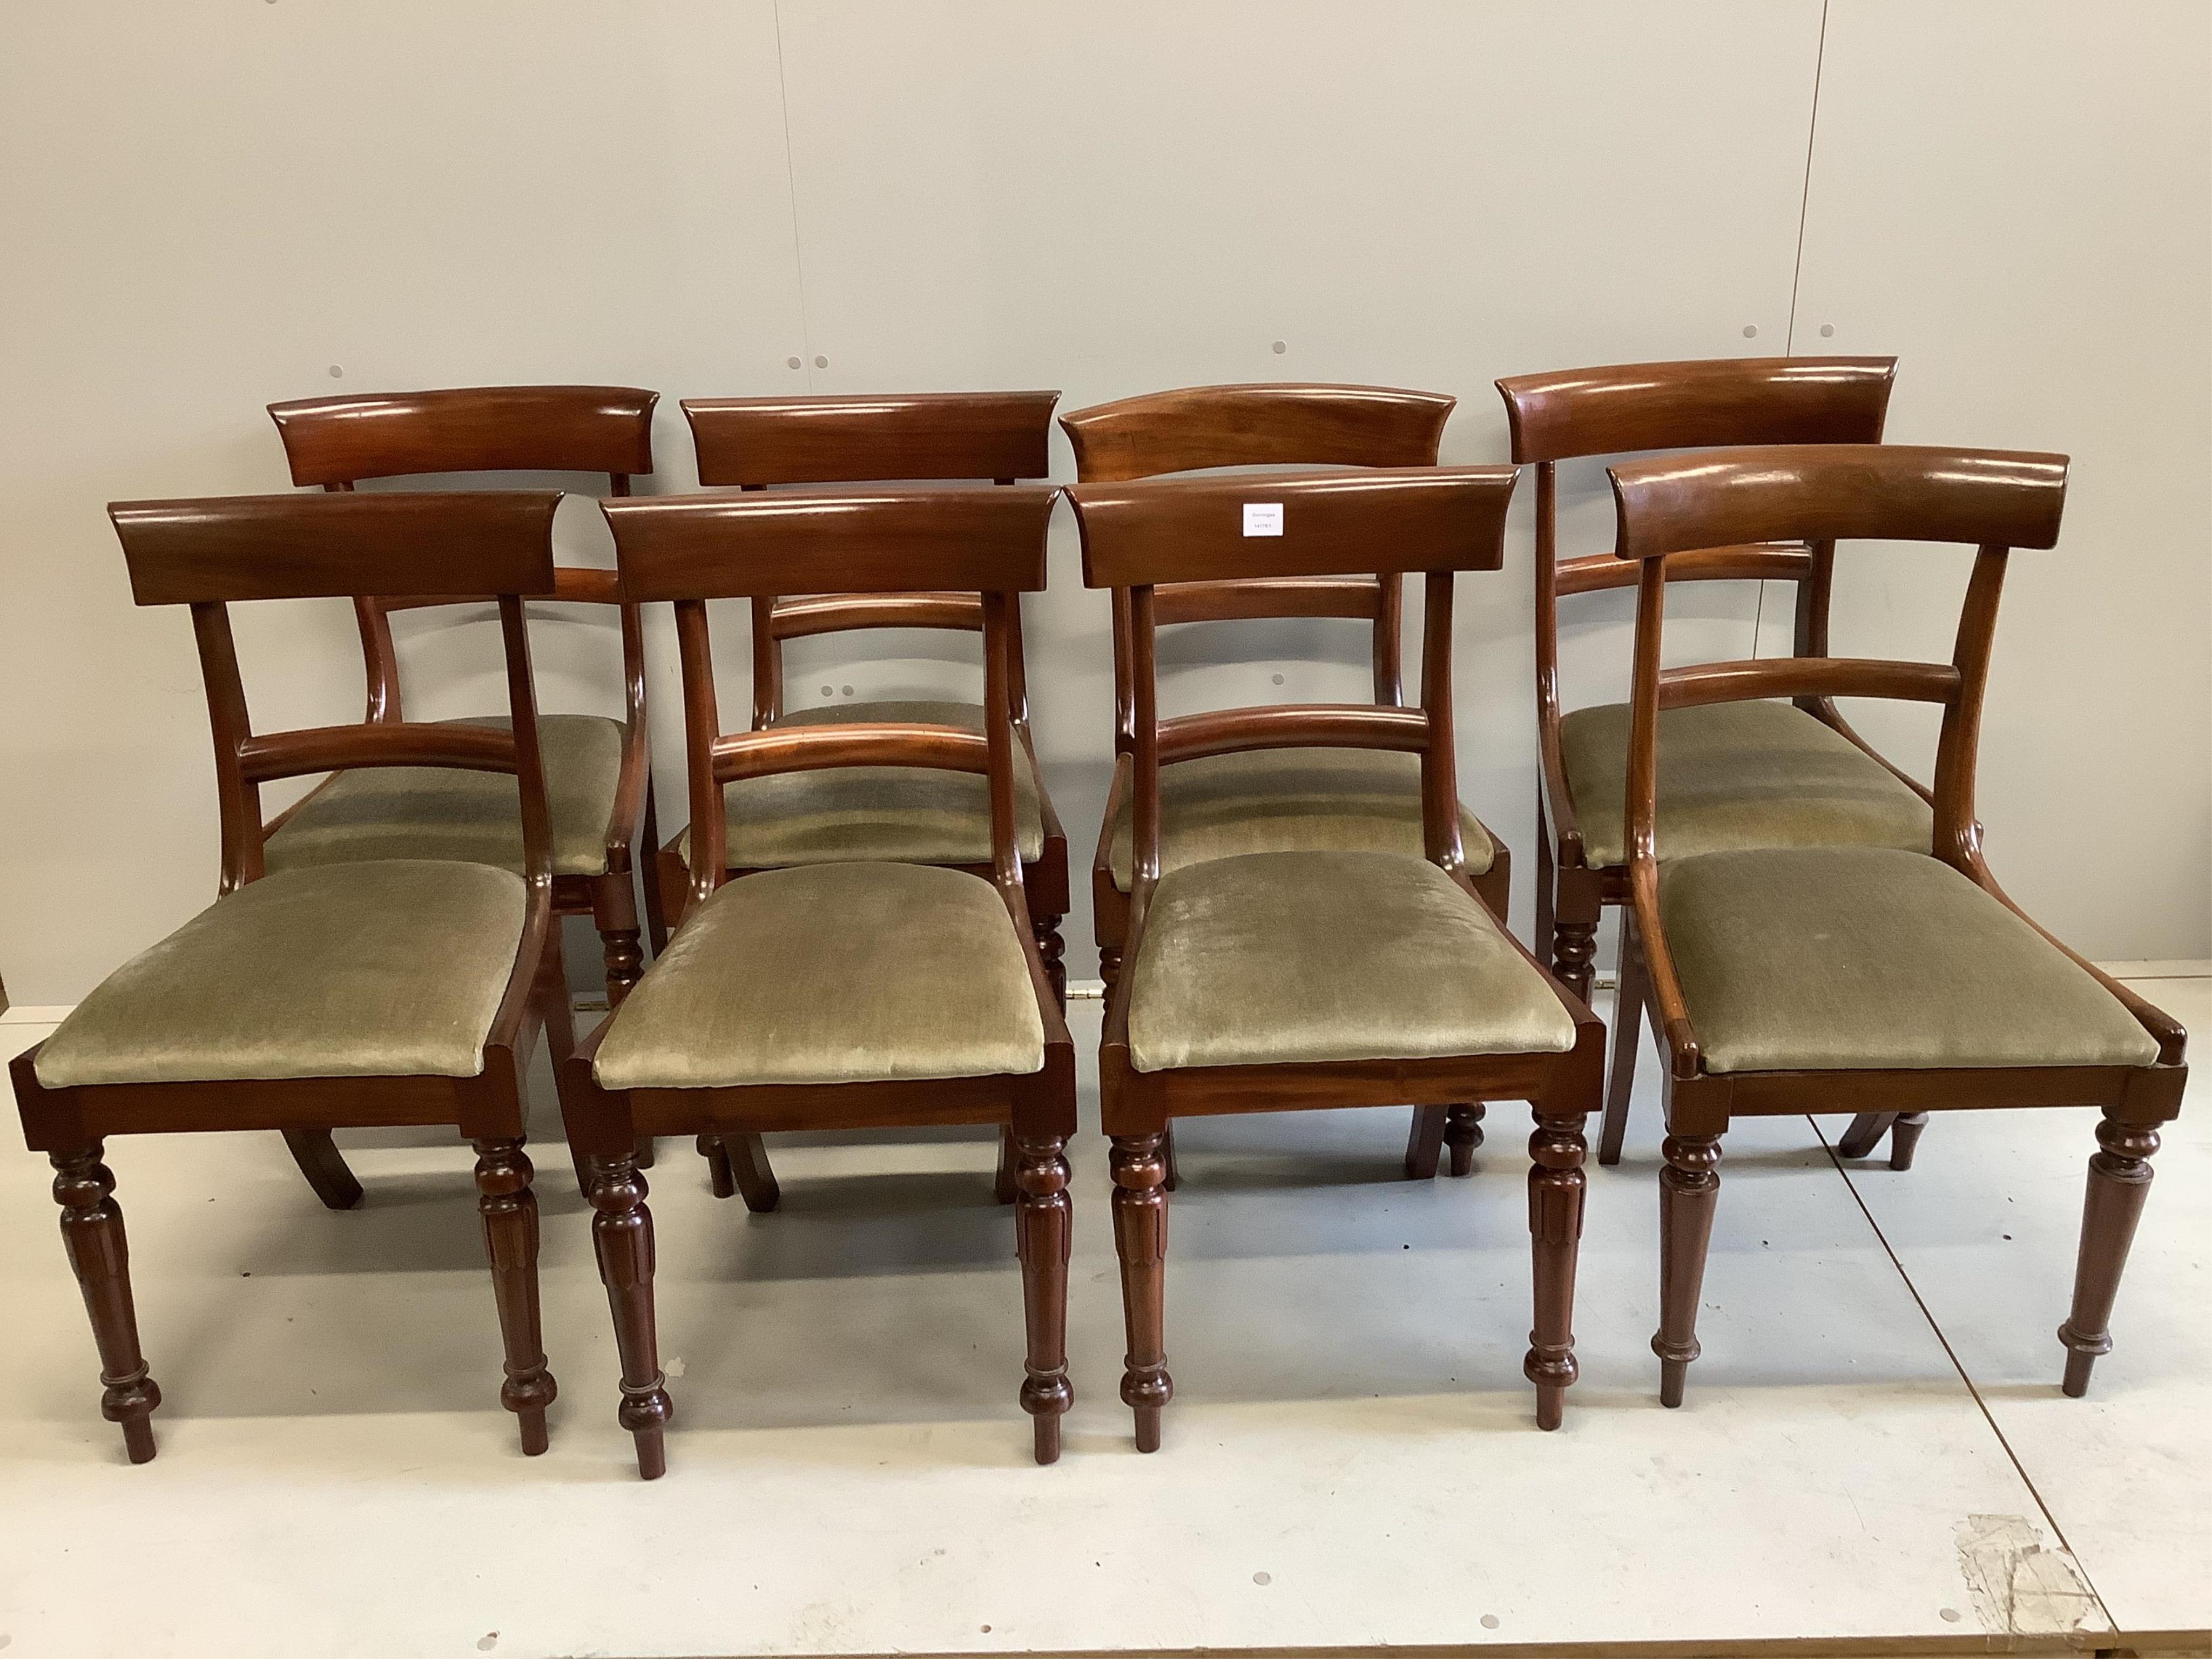 A harlequin set of four William IV mahogany dining chairs and four similar reproduction dining chairs. Condition - good